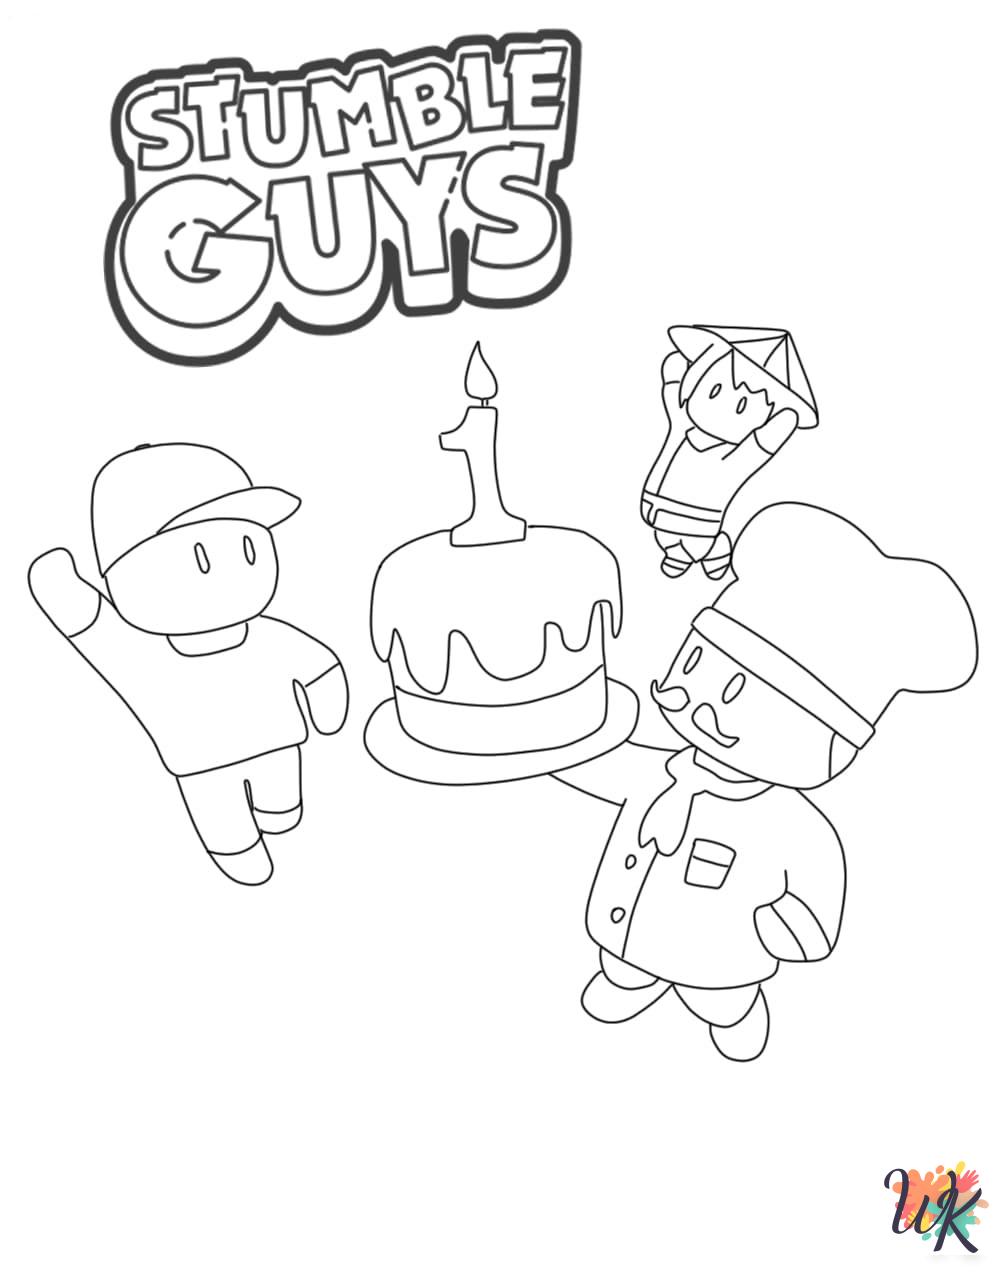 coloring pages printable Stumble Guys